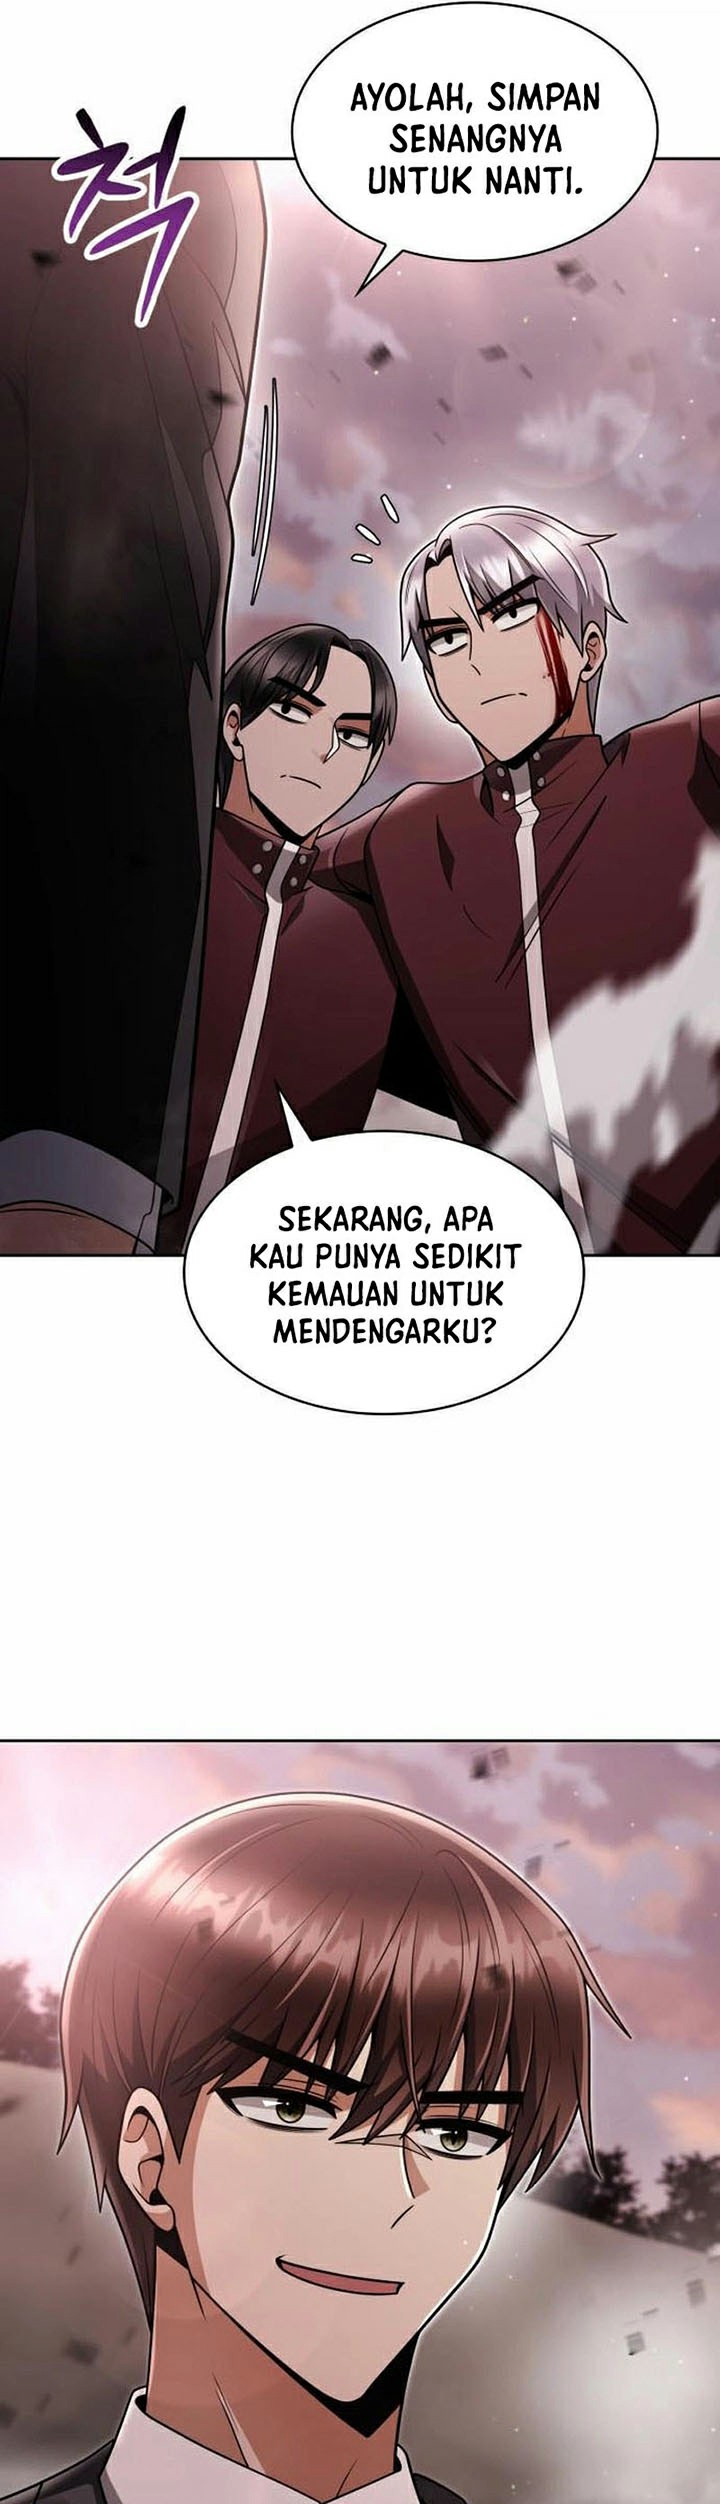 Dilarang COPAS - situs resmi www.mangacanblog.com - Komik clever cleaning life of the returned genius hunter 060 - chapter 60 61 Indonesia clever cleaning life of the returned genius hunter 060 - chapter 60 Terbaru 39|Baca Manga Komik Indonesia|Mangacan